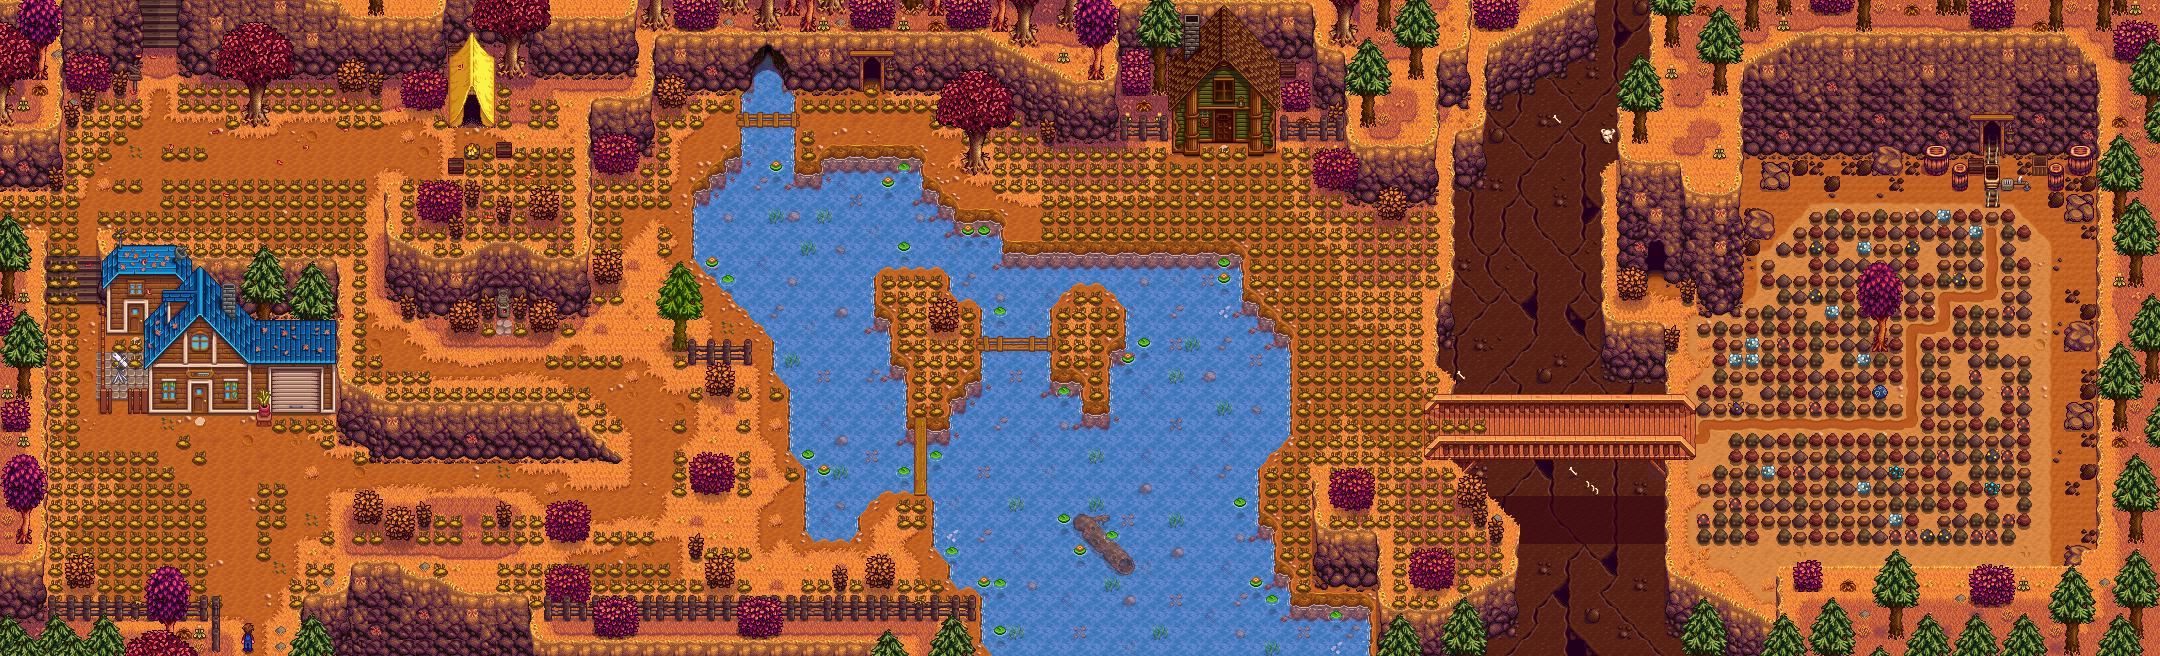 stardew-valley/Min-Max_Guide.md at main · Zamiell/stardew-valley